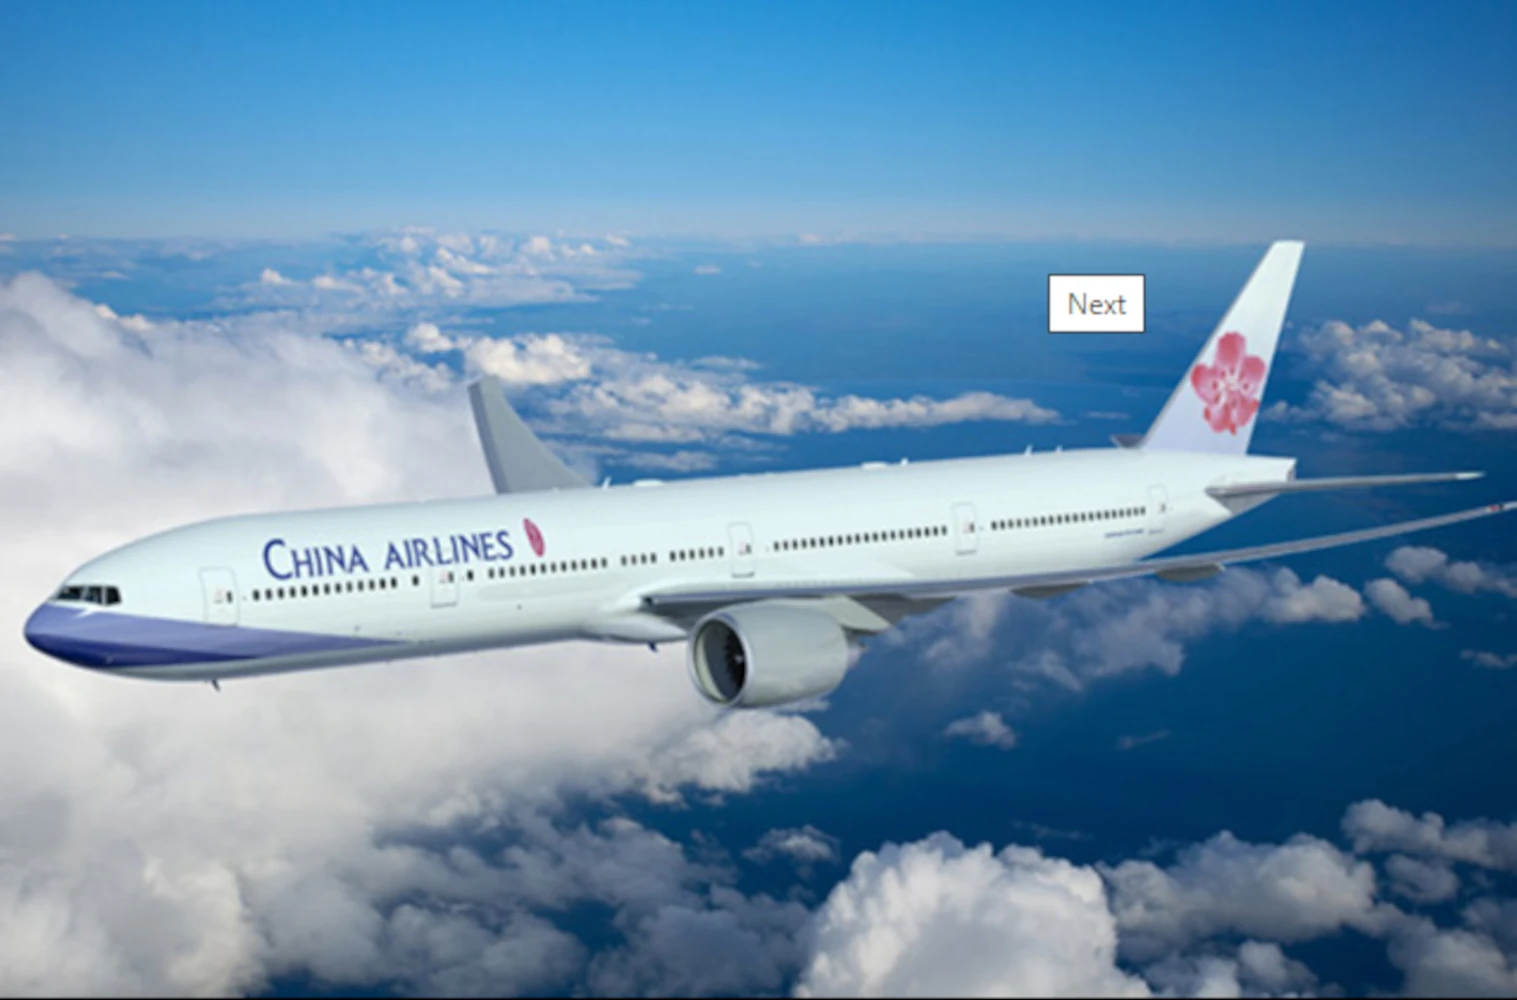 Chinese Airlines Boeing planes